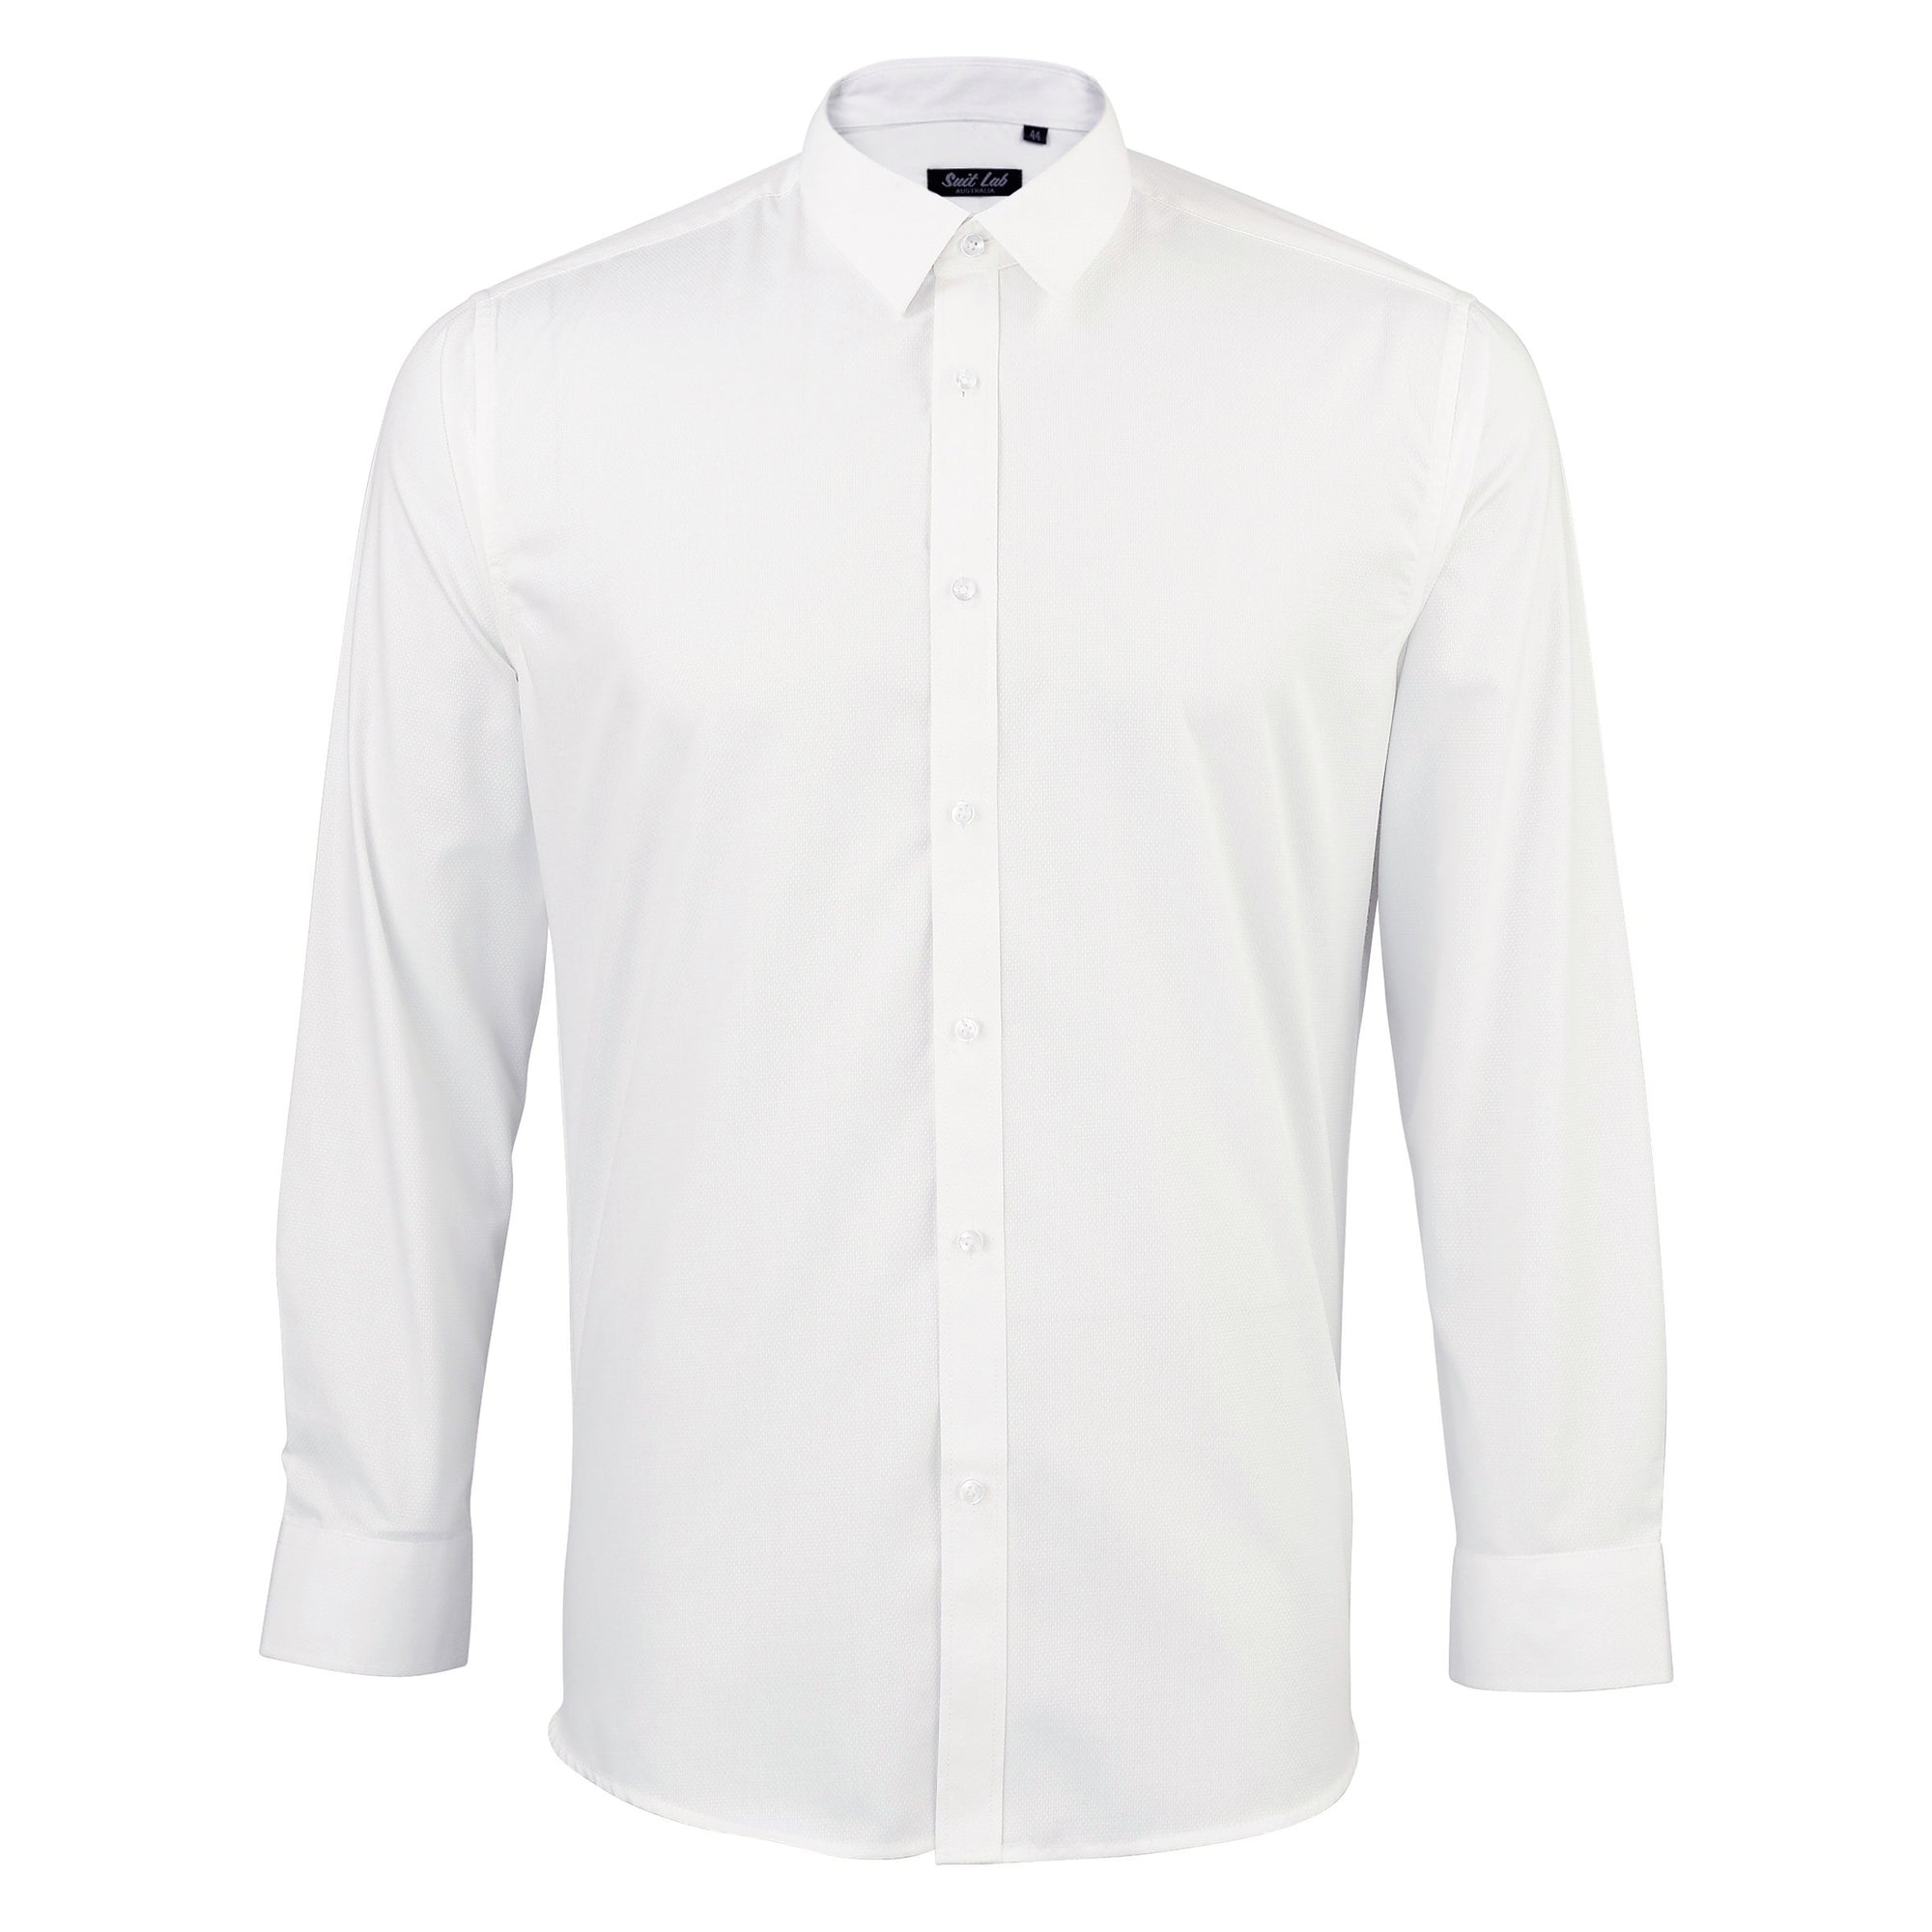 Mens Soft White Textured Shirt with White Buttons